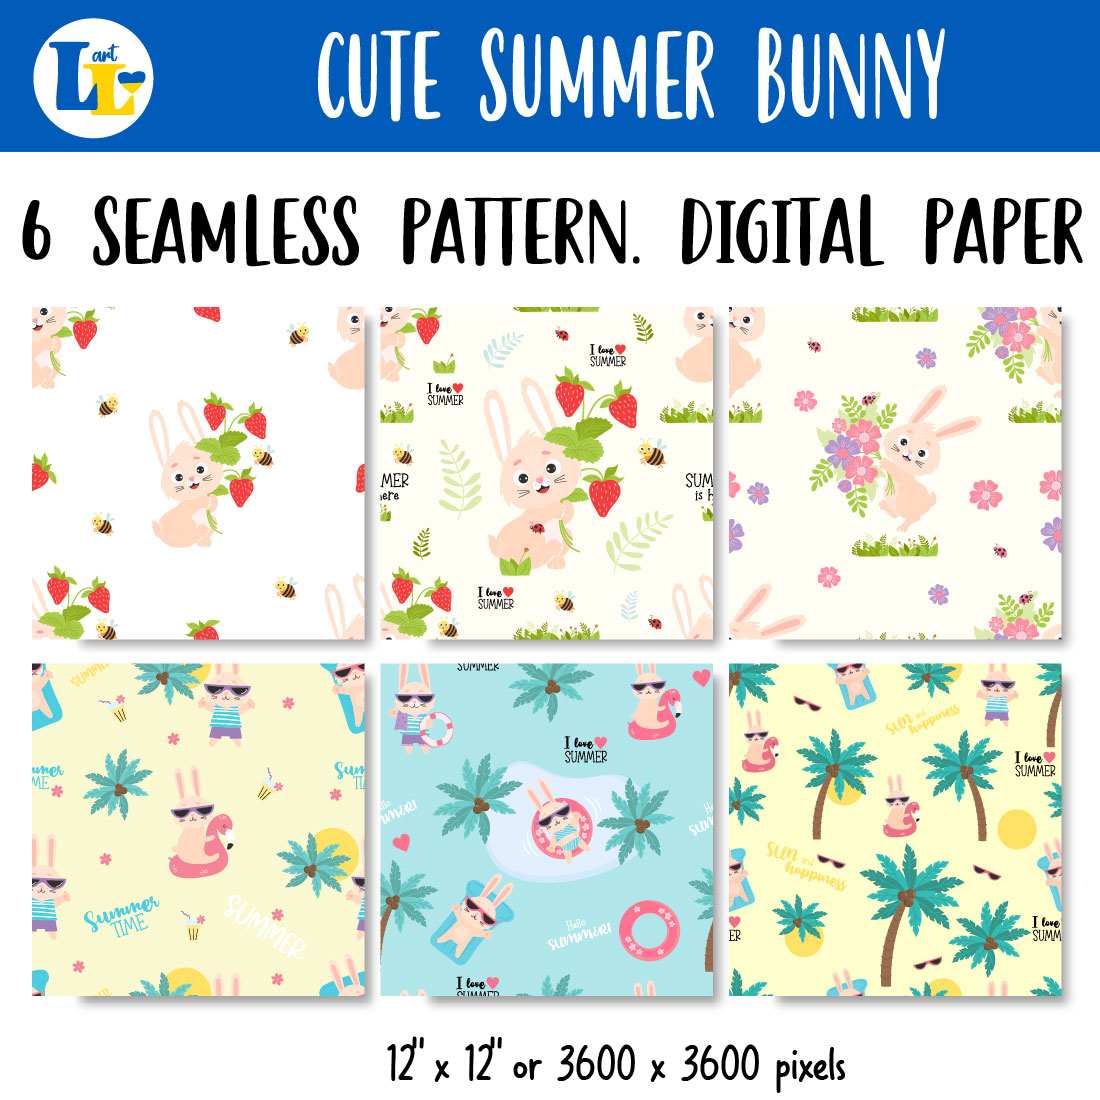 Bunny Digital Paper Pattern Background examples.